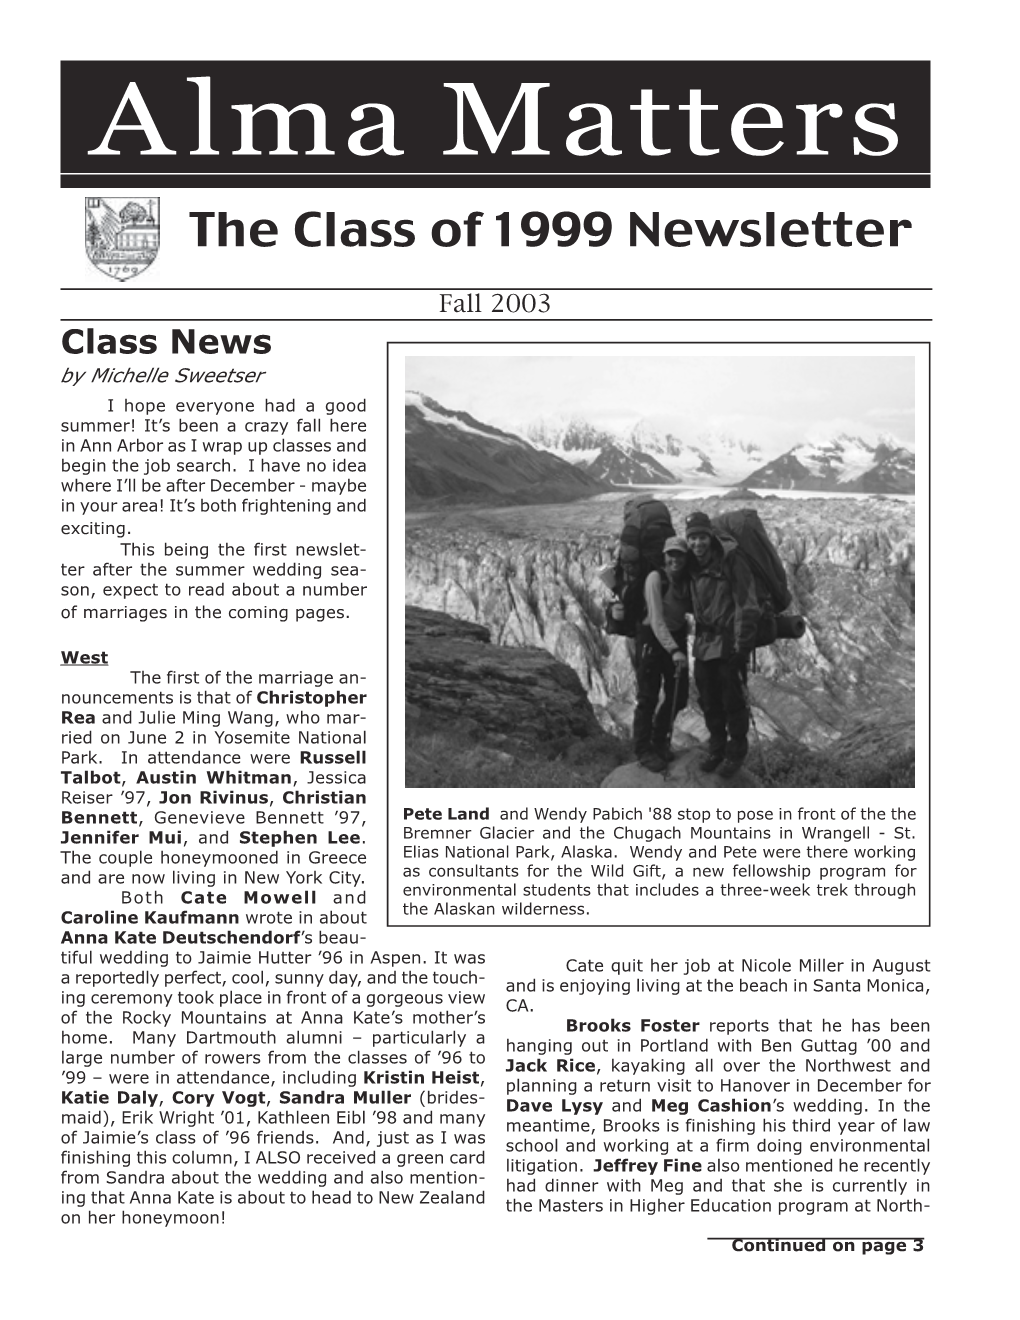 Fall 2003 Class News by Michelle Sweetser I Hope Everyone Had a Good Summer! It’S Been a Crazy Fall Here in Ann Arbor As I Wrap up Classes and Begin the Job Search